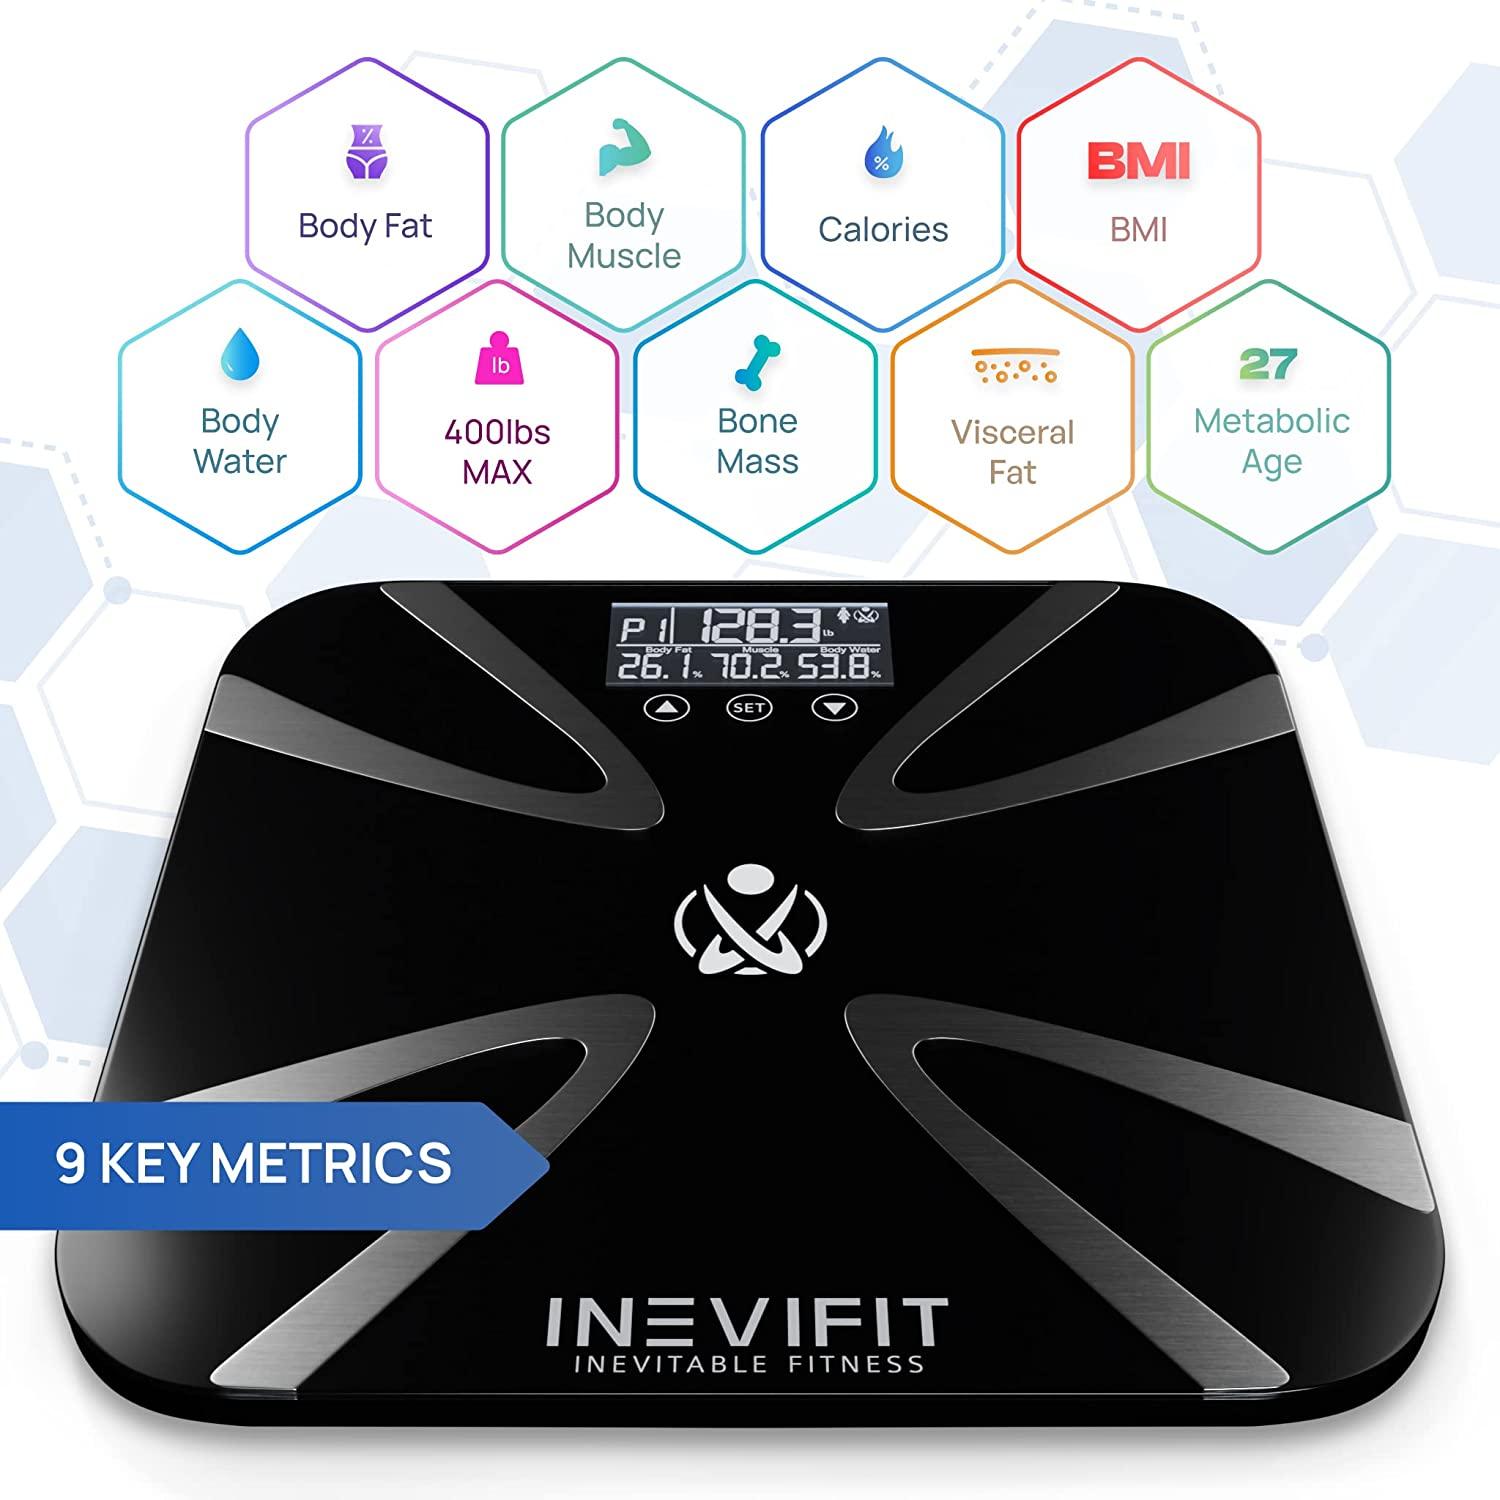 INEVIFIT Body-Analyzer Scale, Highly Accurate Digital Bathroom Body  Composition Analyzer, Measures Weight, Body Fat, Water, Muscle & Bone Mass  for 10